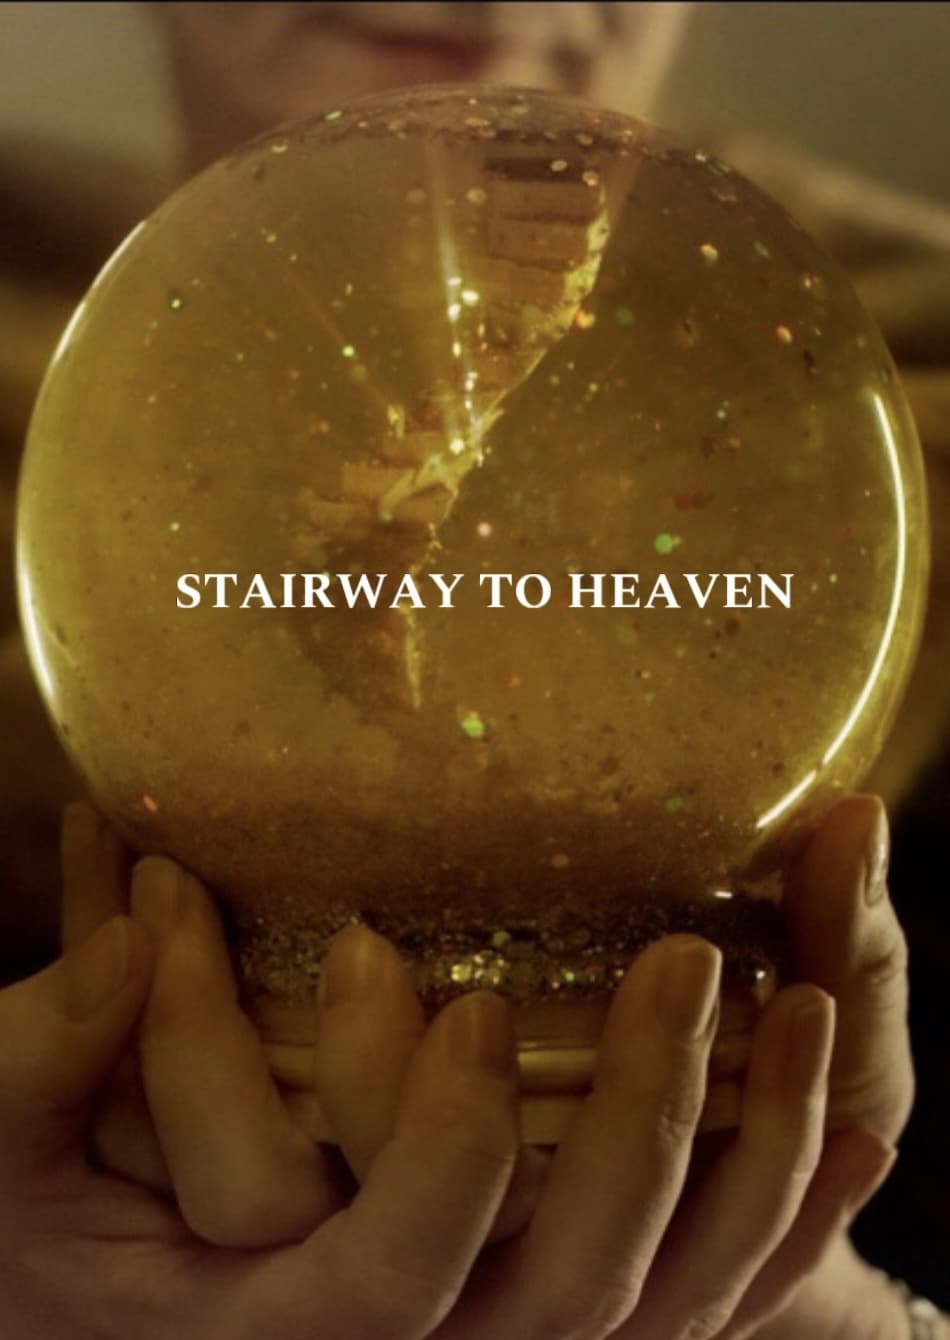 Stairway to Heaven: A Very Literal Music Video